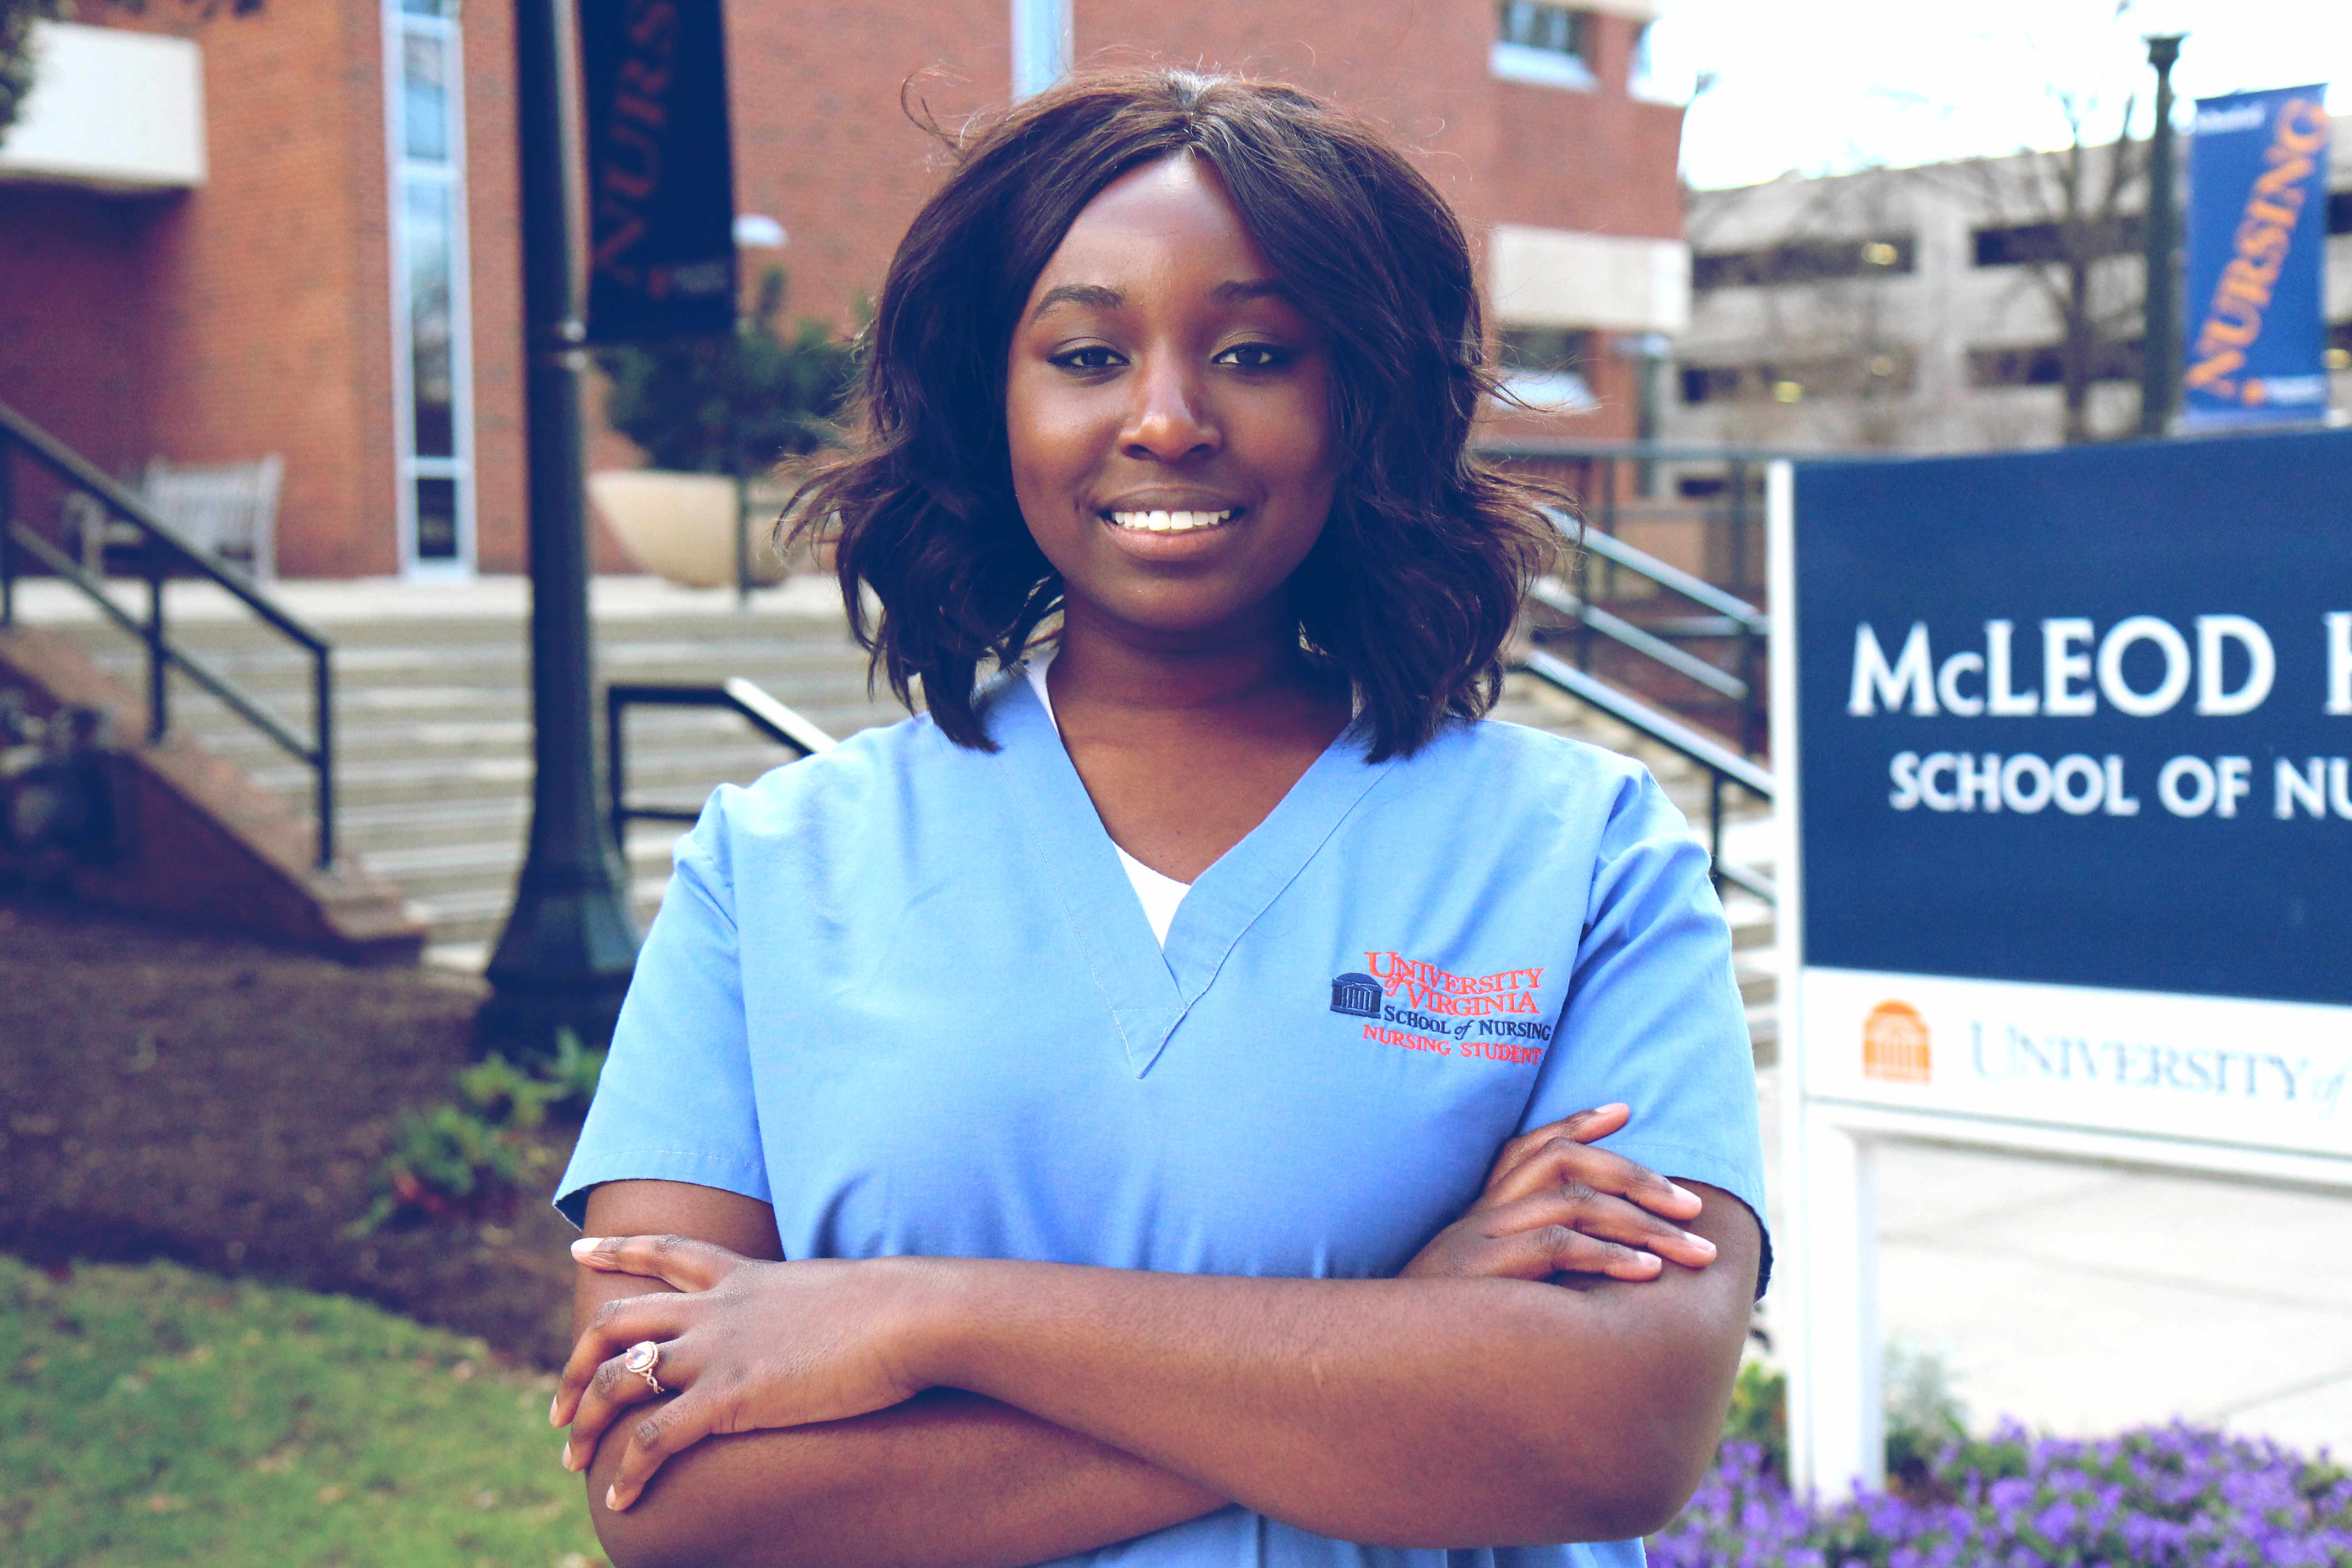 “It wasn’t until I began nursing school that it became an outlet," Michelle Bonsu said of her baking.